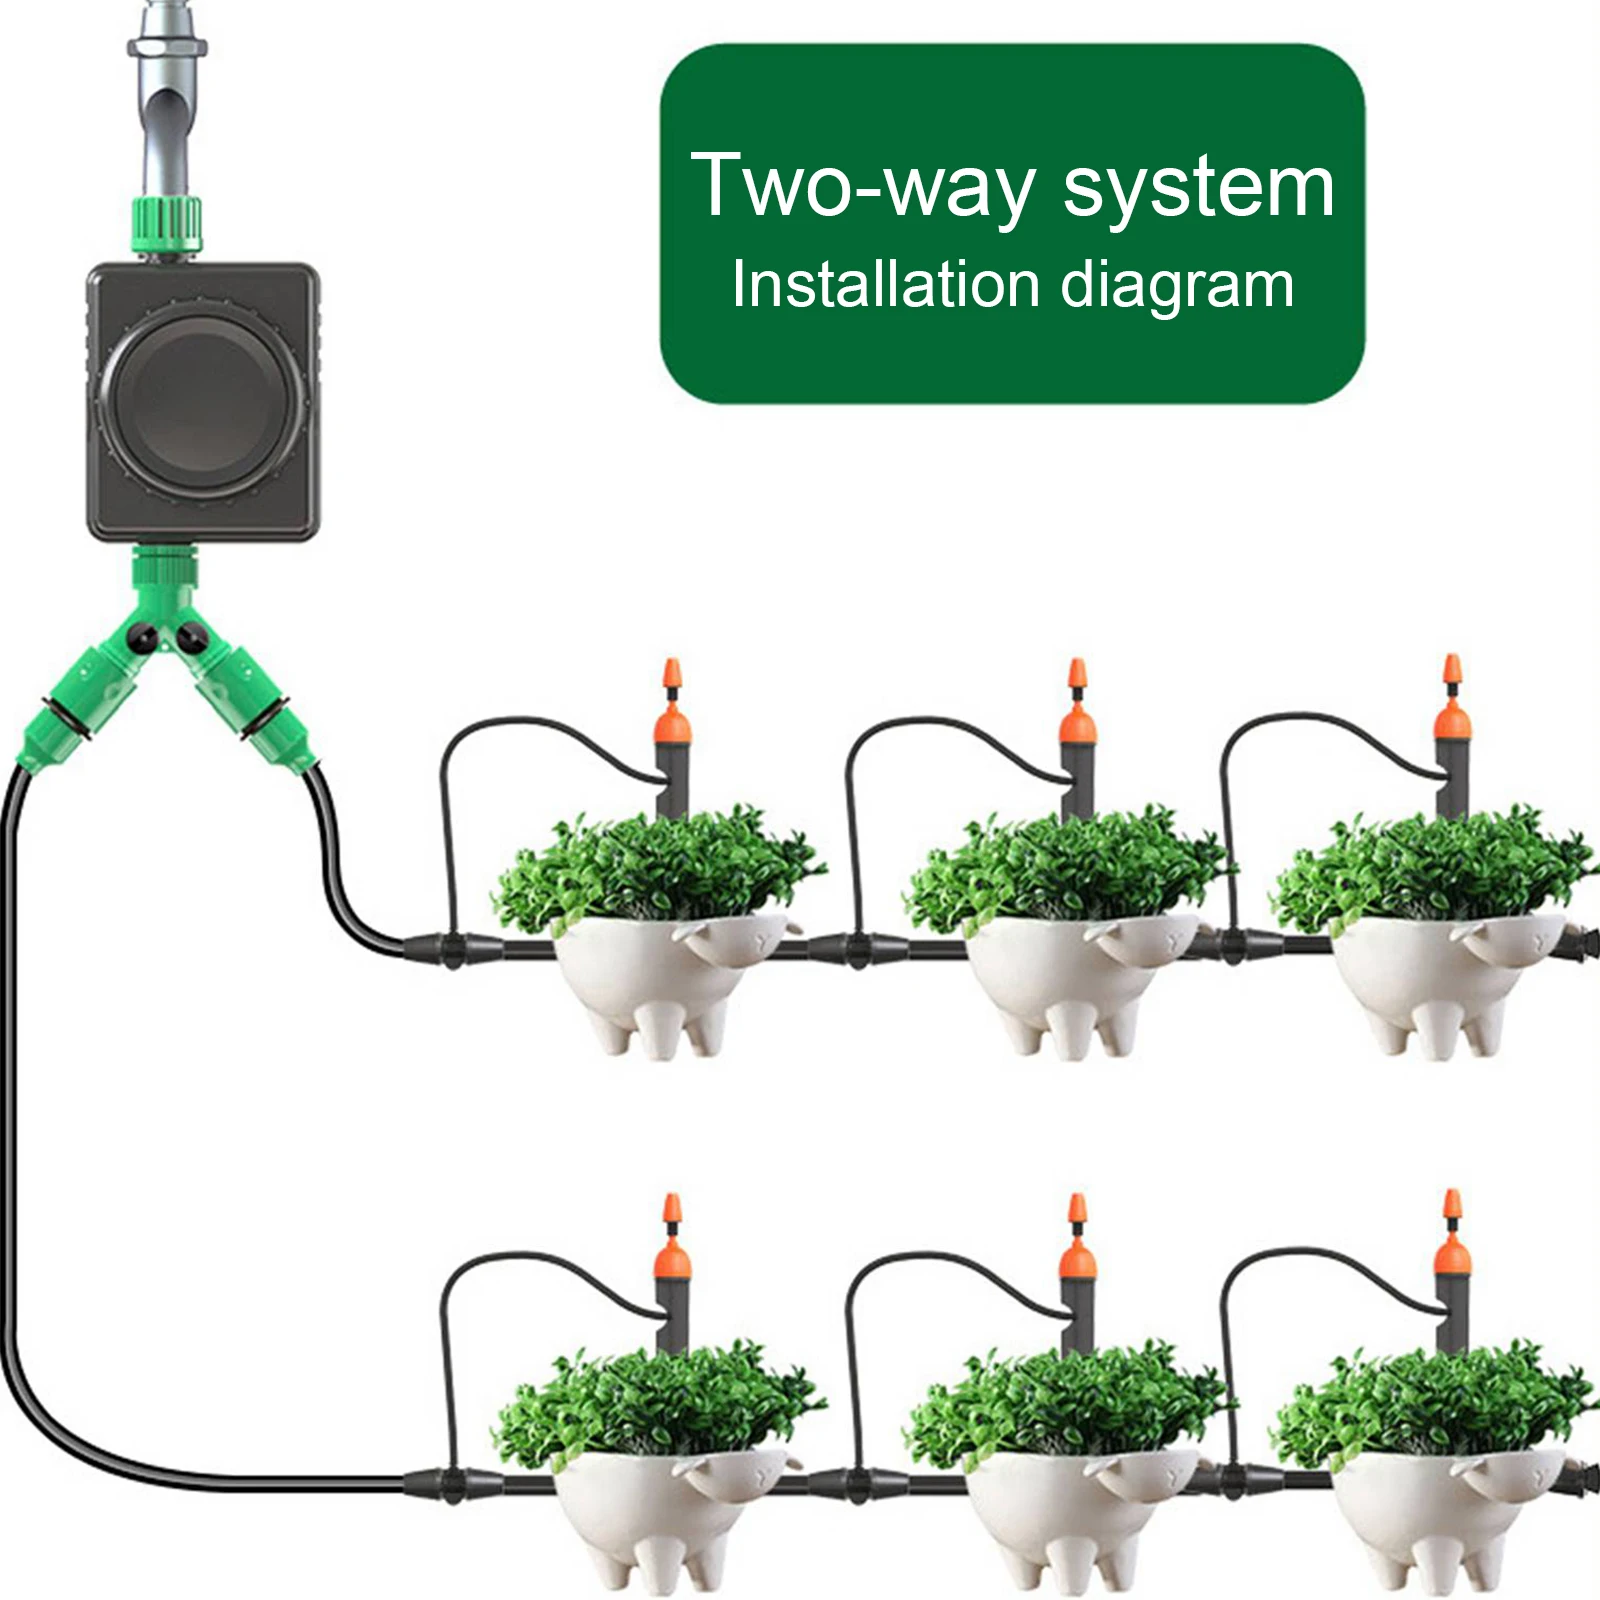 WIFI Control Plant Drip Irrigation Watering System Kit Garden Automatic Watering Device Pots Timed Water Pump